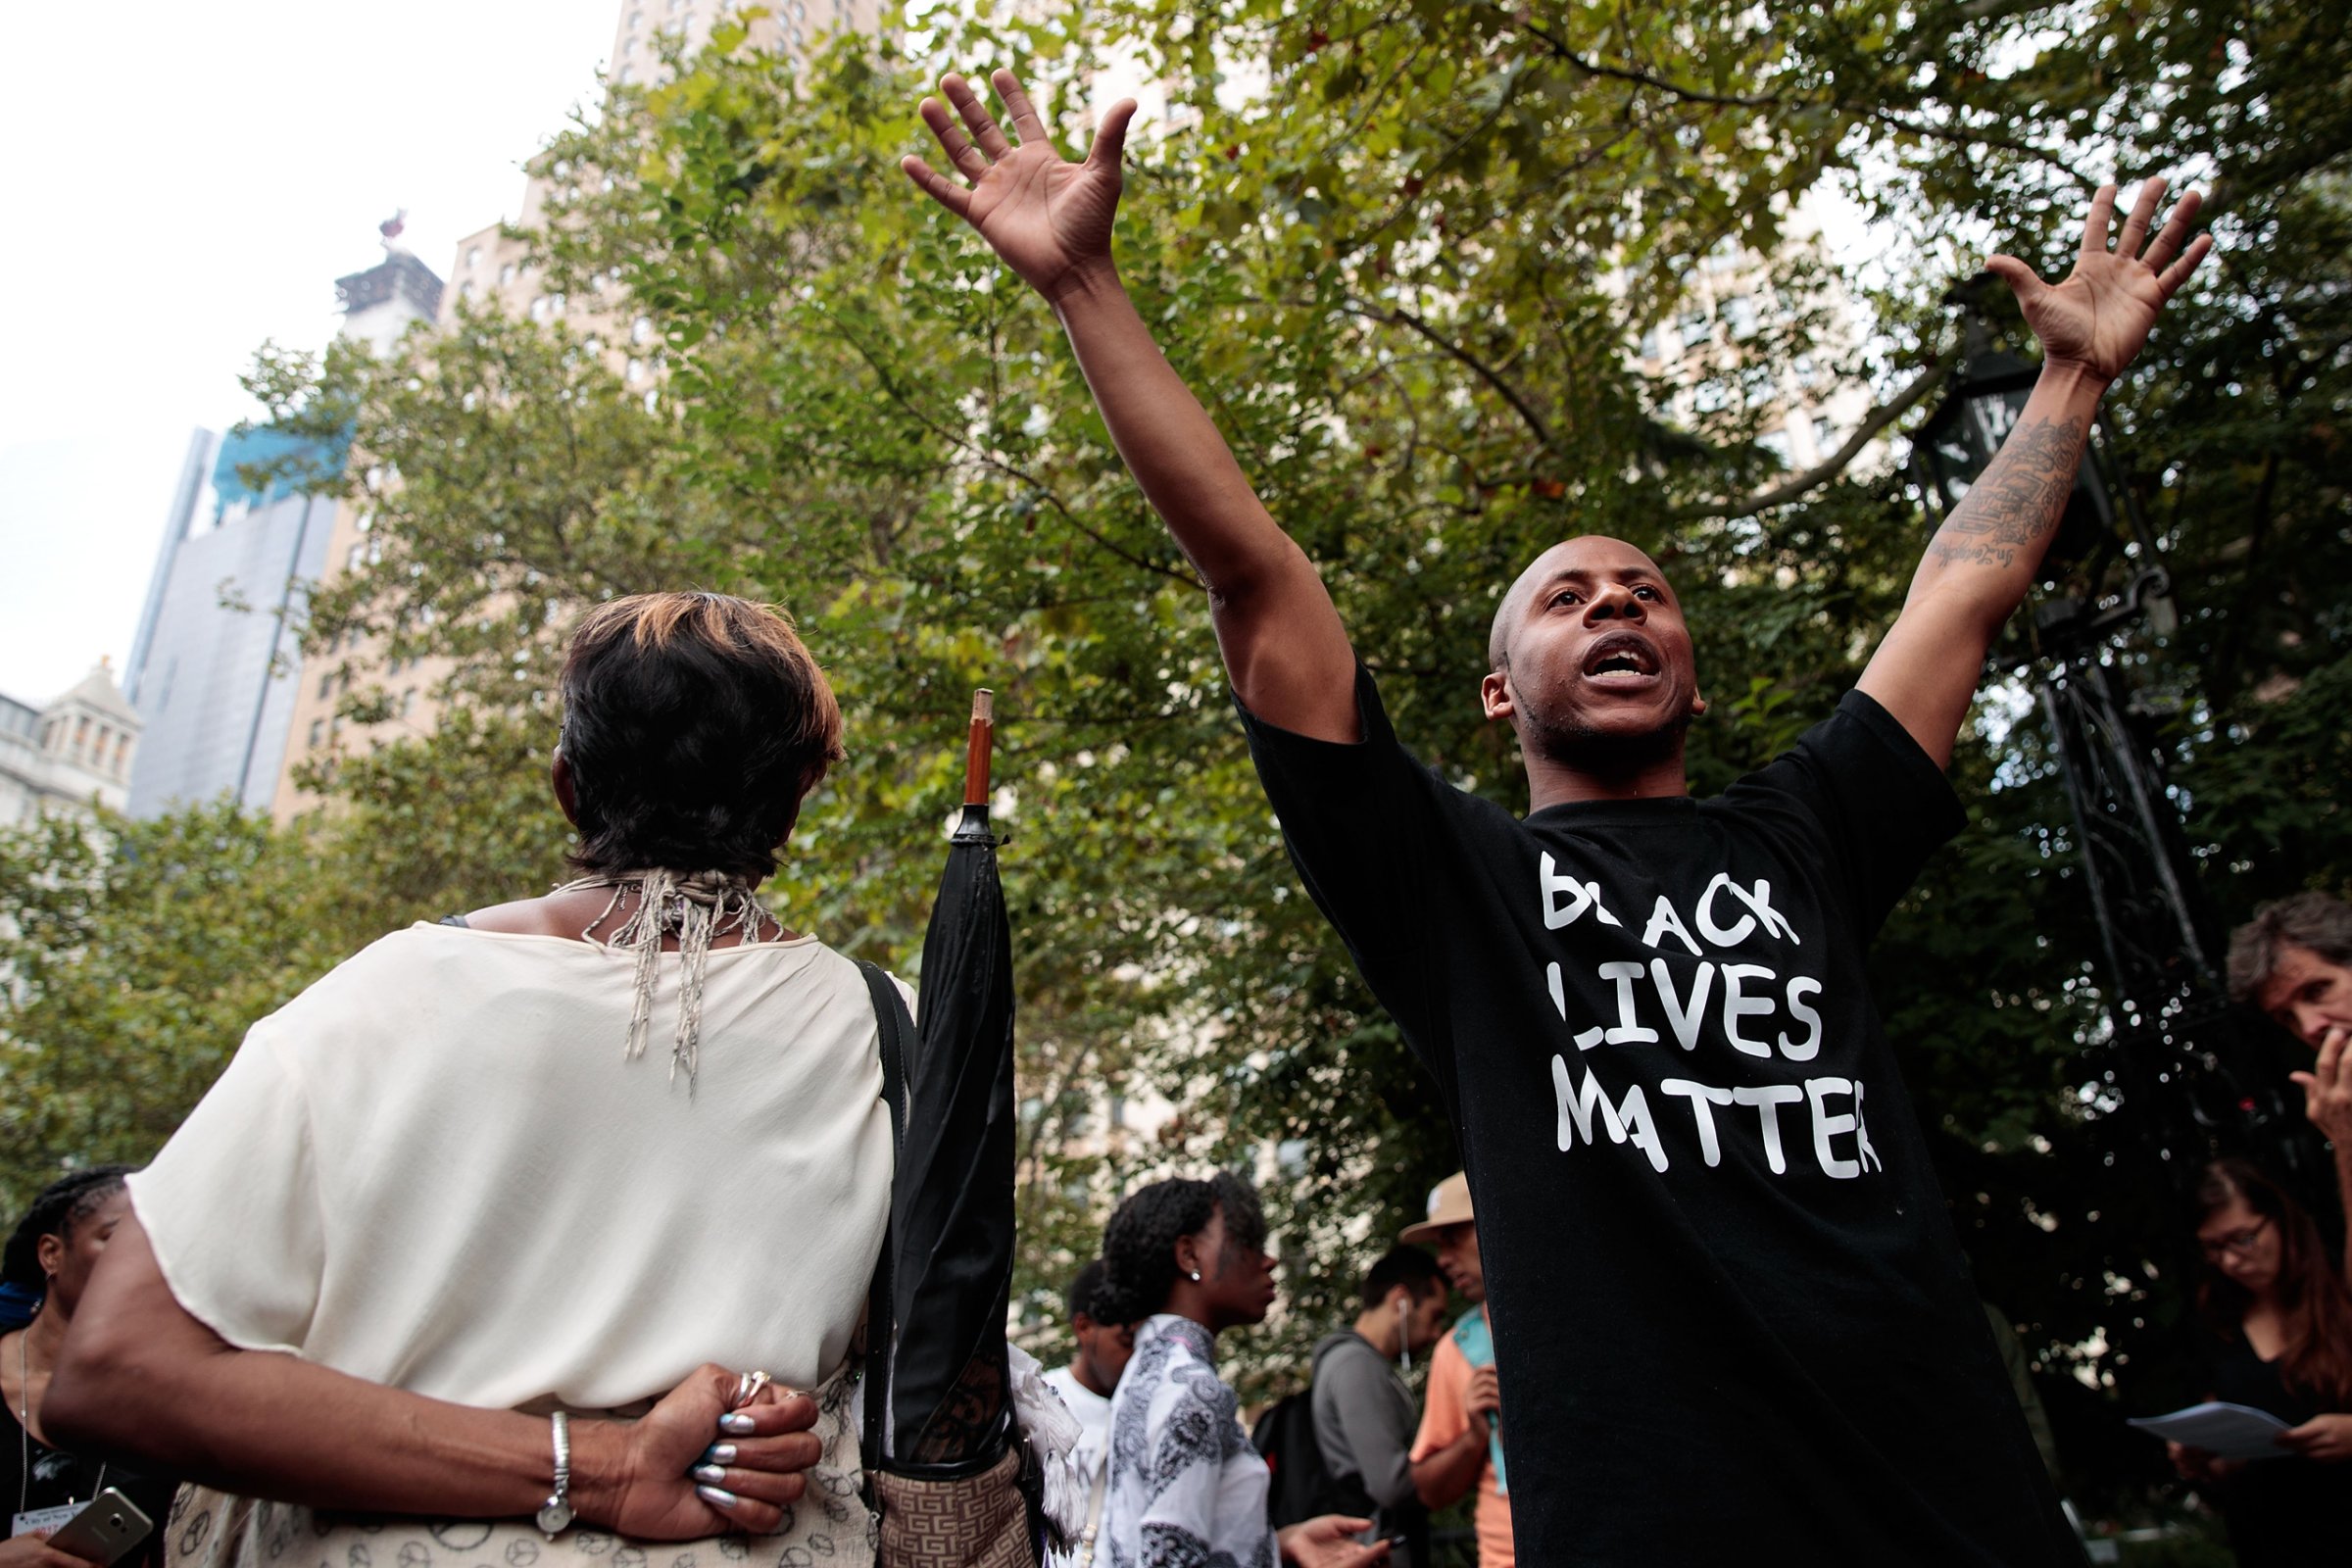 Protestors rally during a protest against police brutality at City Hall Park in New York City on Aug. 1, 2016.